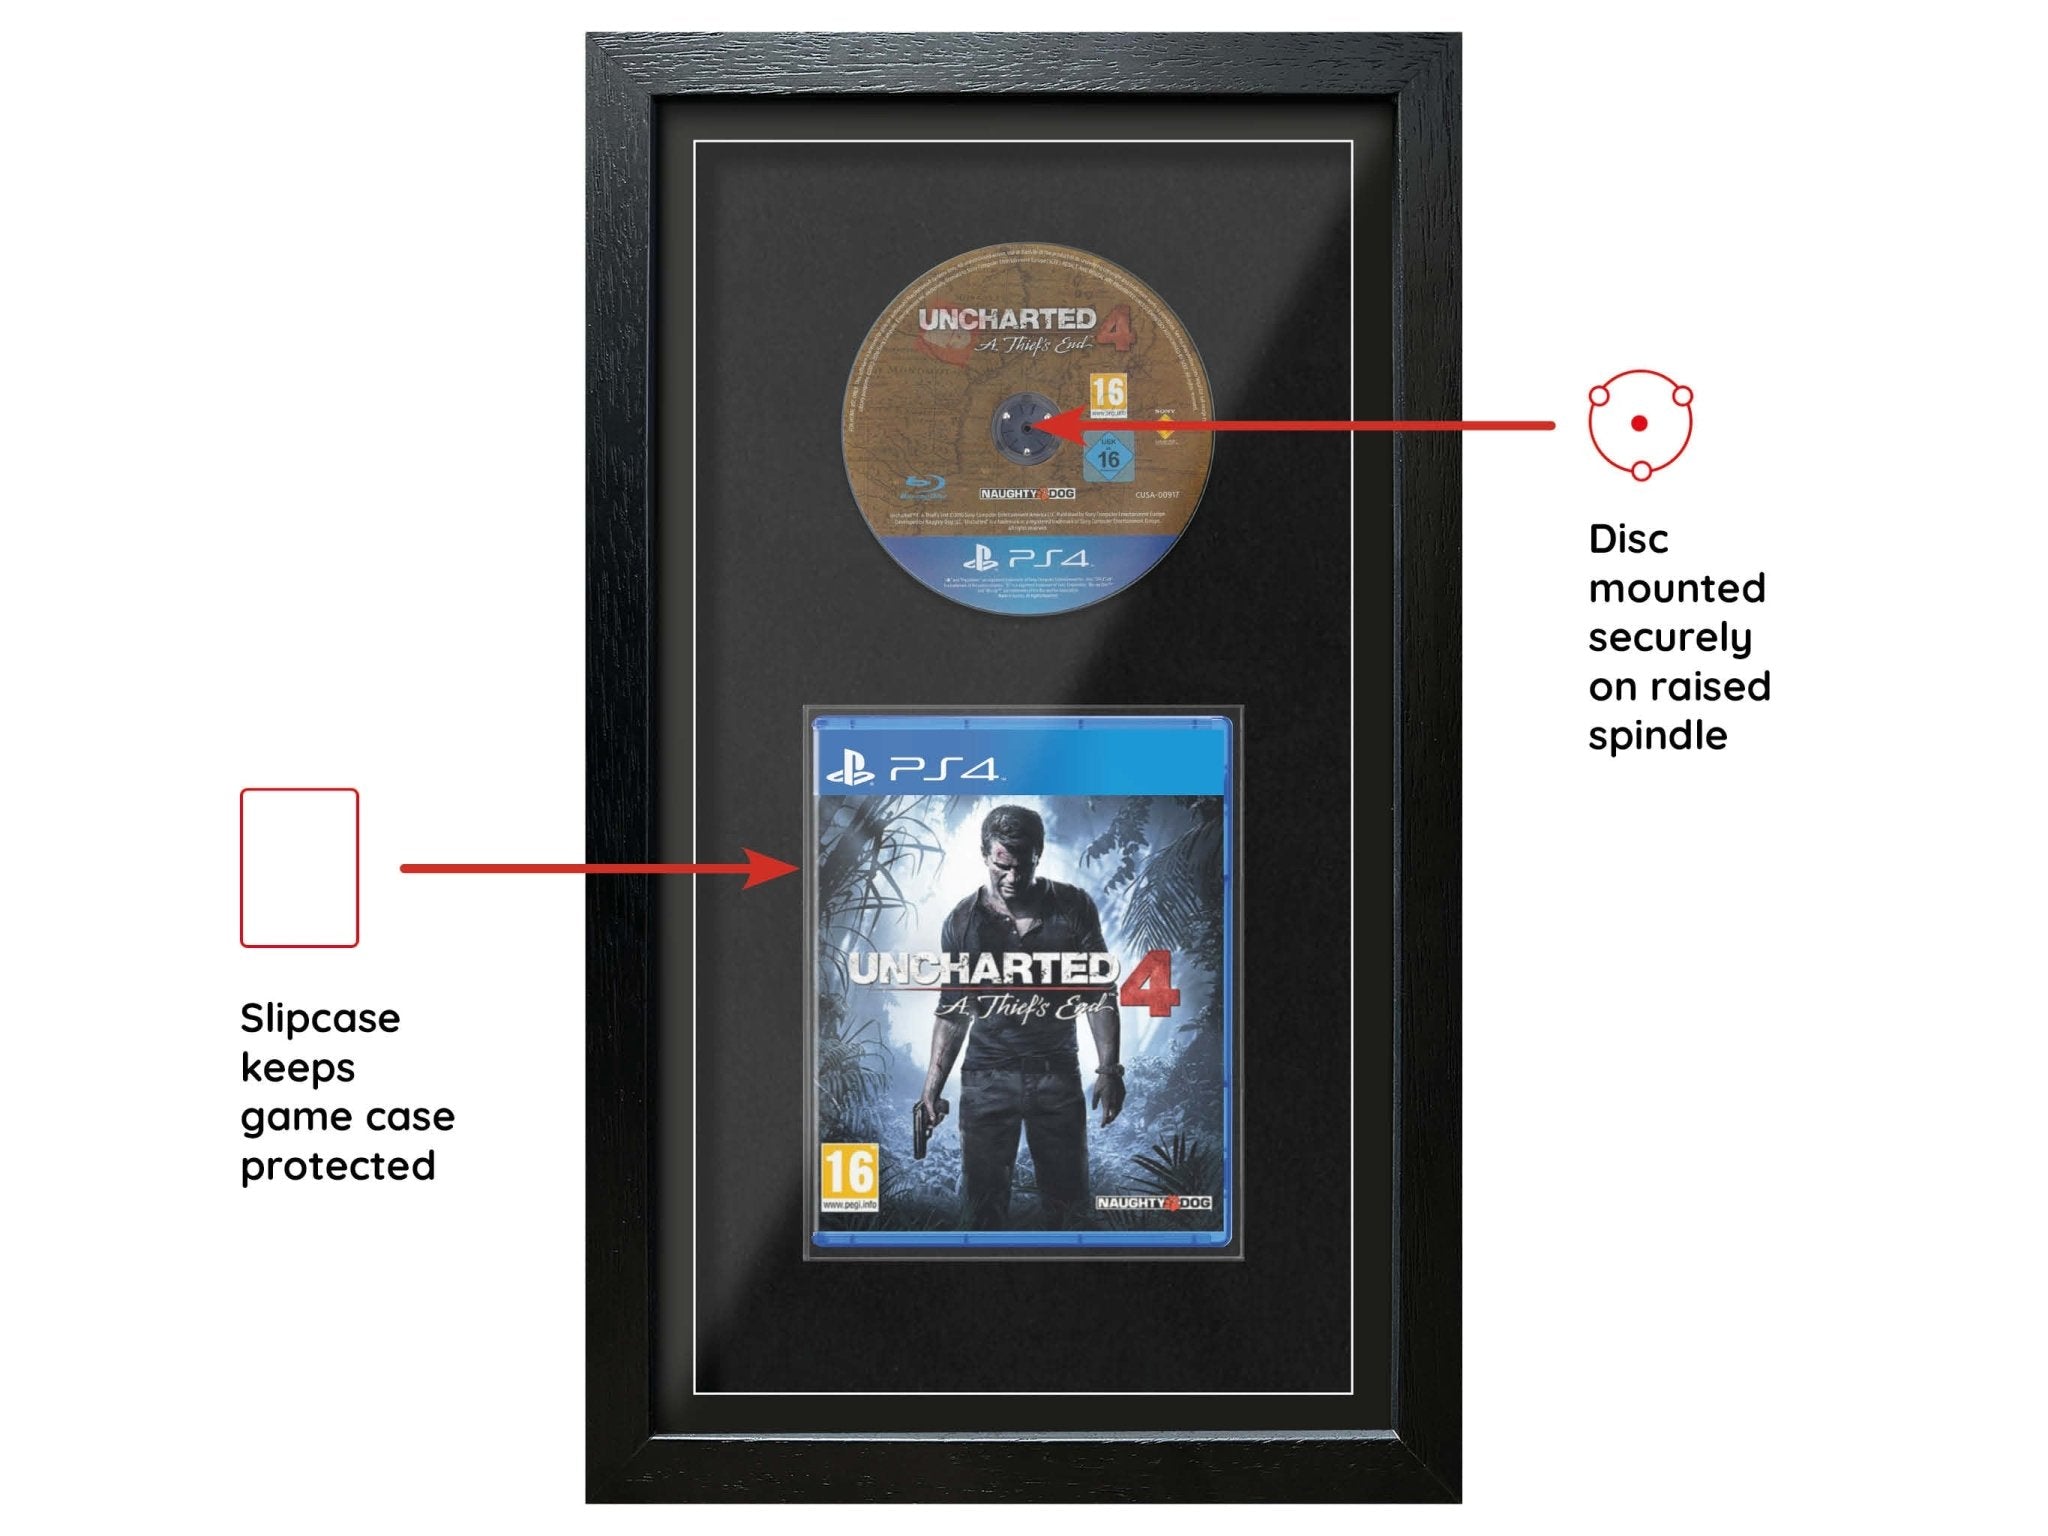 Uncharted 4: A Thief's End (Exhibition Range) Framed Game - Frame-A-Game